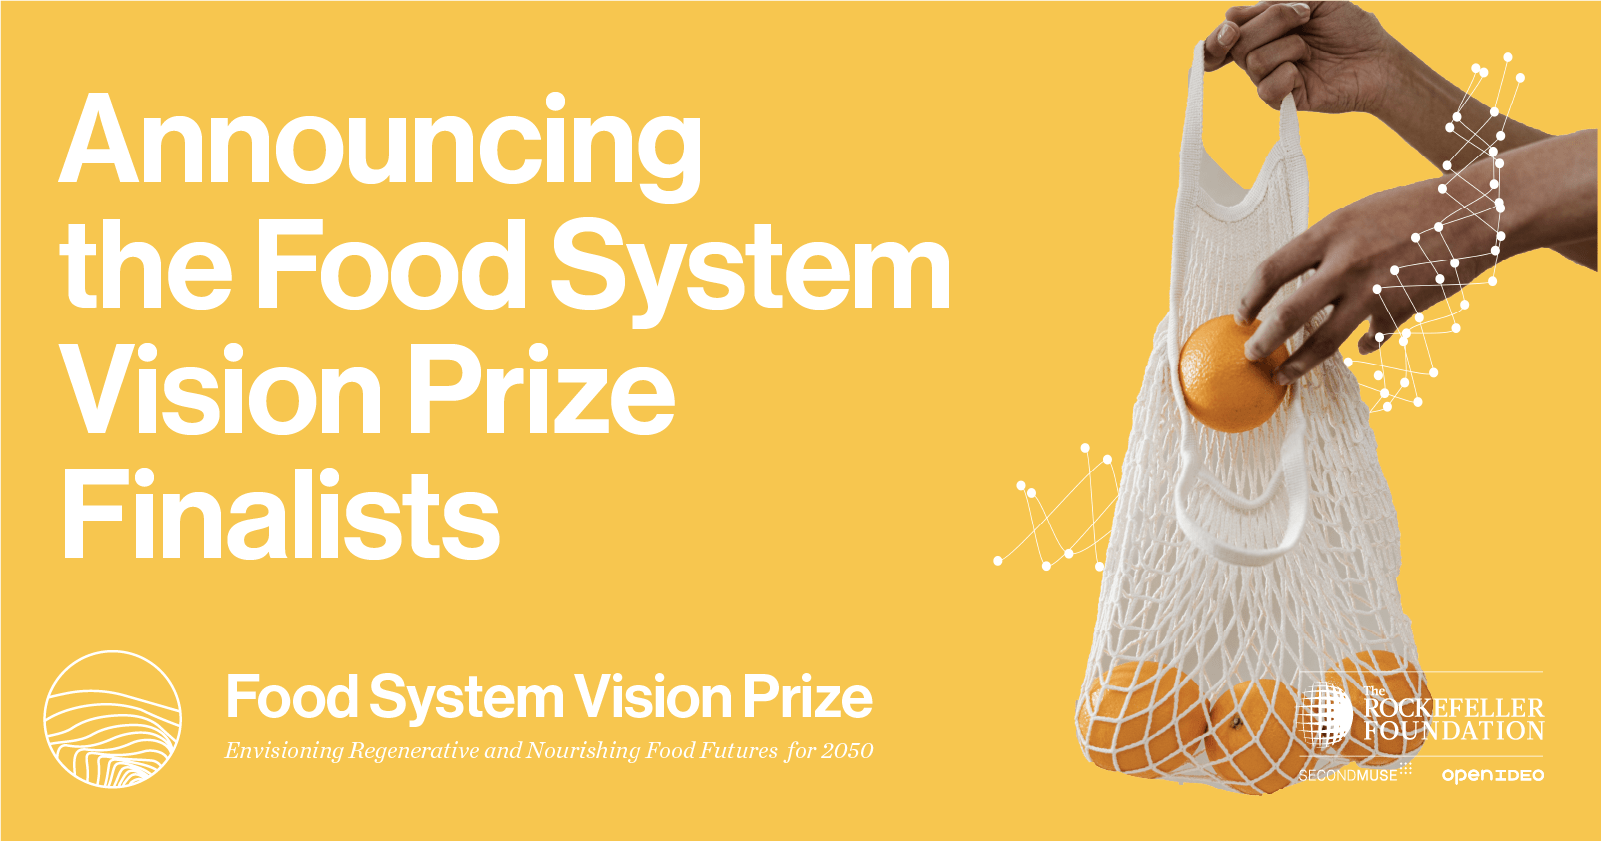 The Rockefeller Foundation Announces 10 Finalists for the Food System Vision Prize